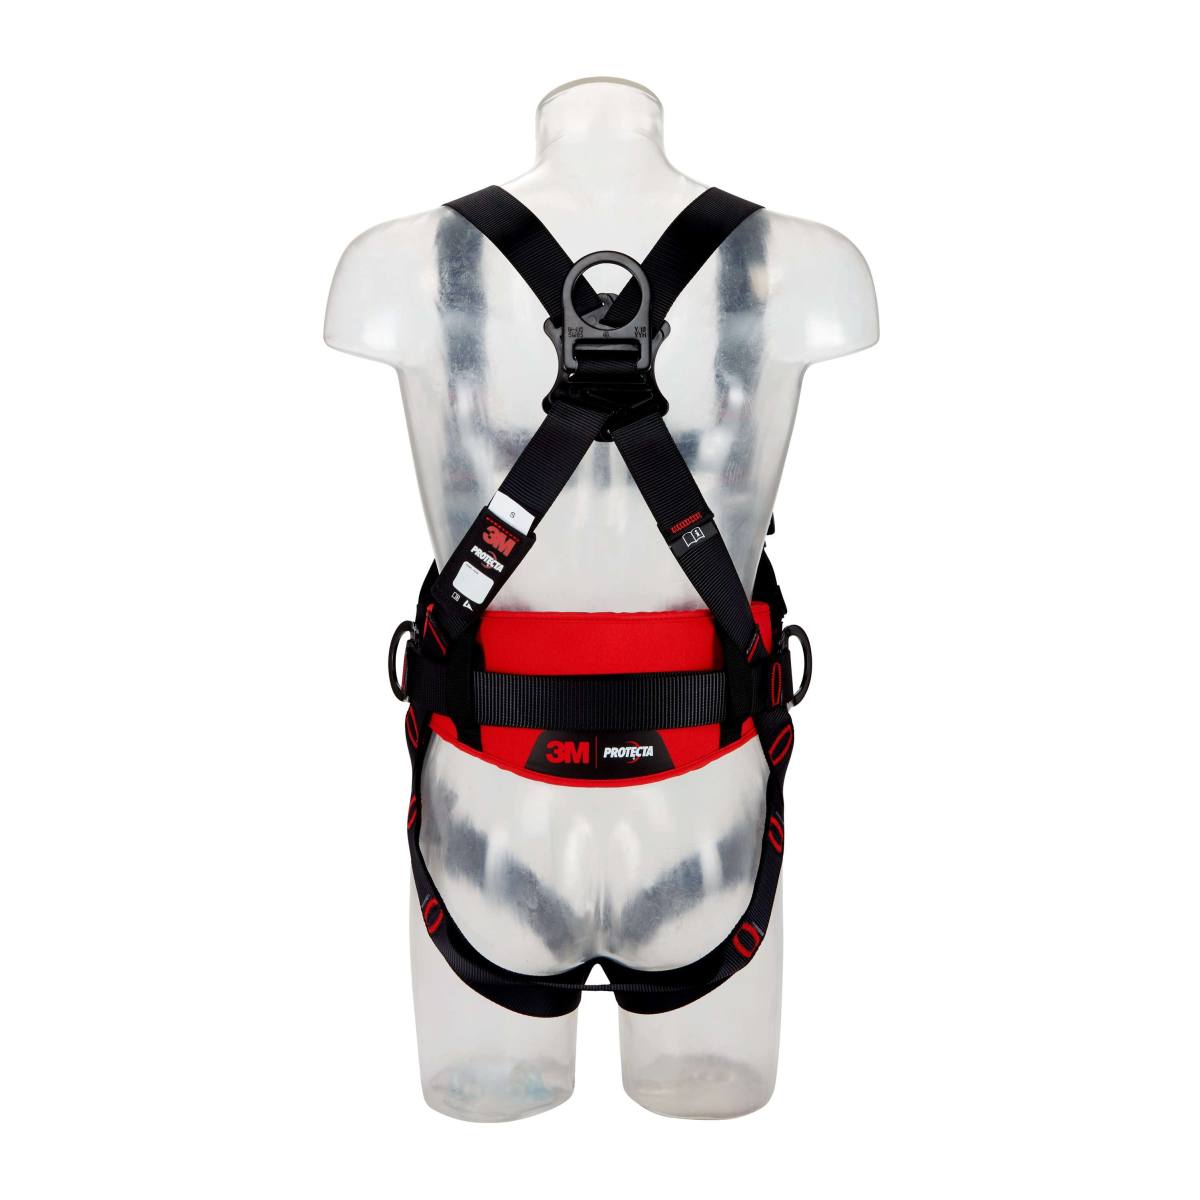  3M PROTECTA Full body harness - chest and rear fall arrest eyelets, comfort harness with side eyelets, automatic buckles, chest and rear fall indicators, belt end depot, label protection with labelling field, black coated, XL